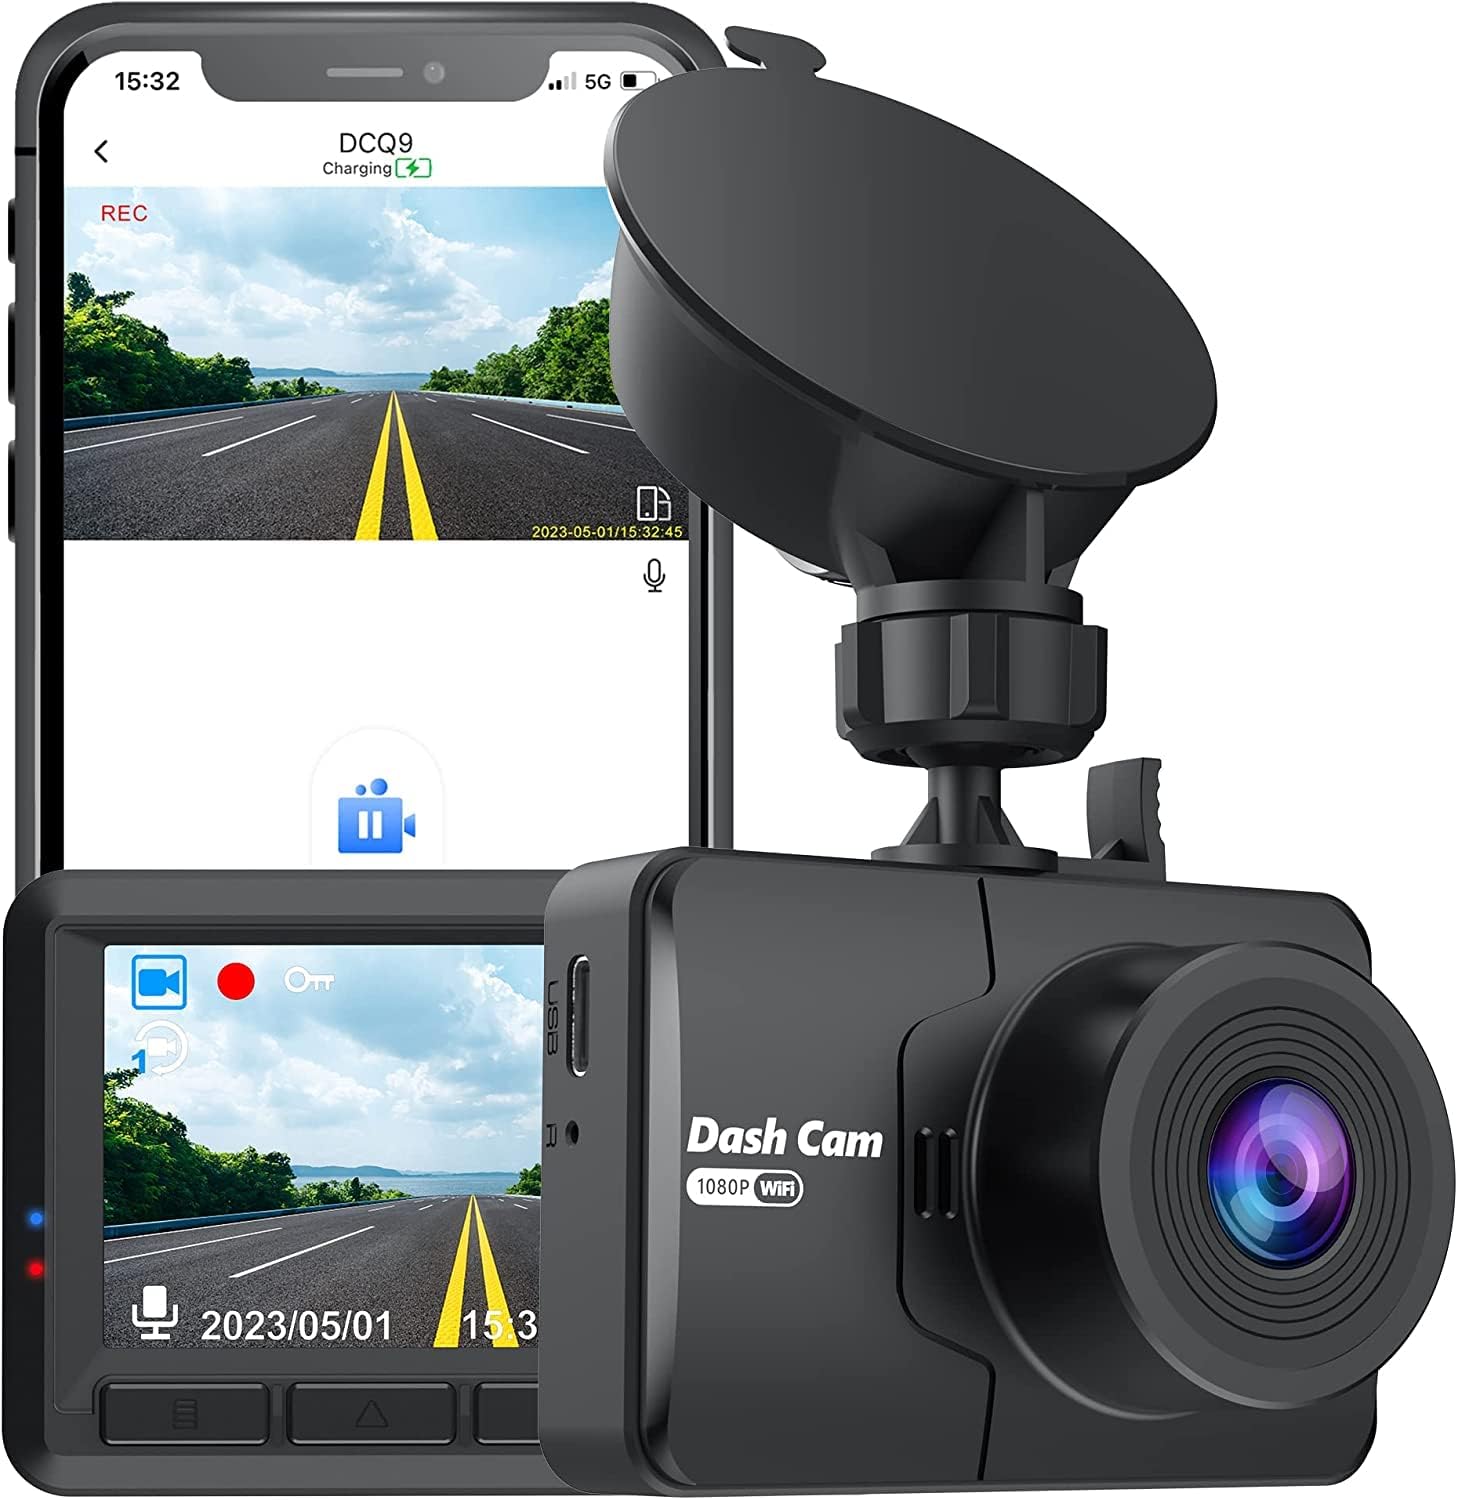 Dash Cam, FHD 1080P Mini Dash Camera for Cars with WiFi, 2.45 IPS Screen, Night Vision, WDR, Loop Recording, G-Sensor Lock, 170°Wide Angle and Parking Monitor